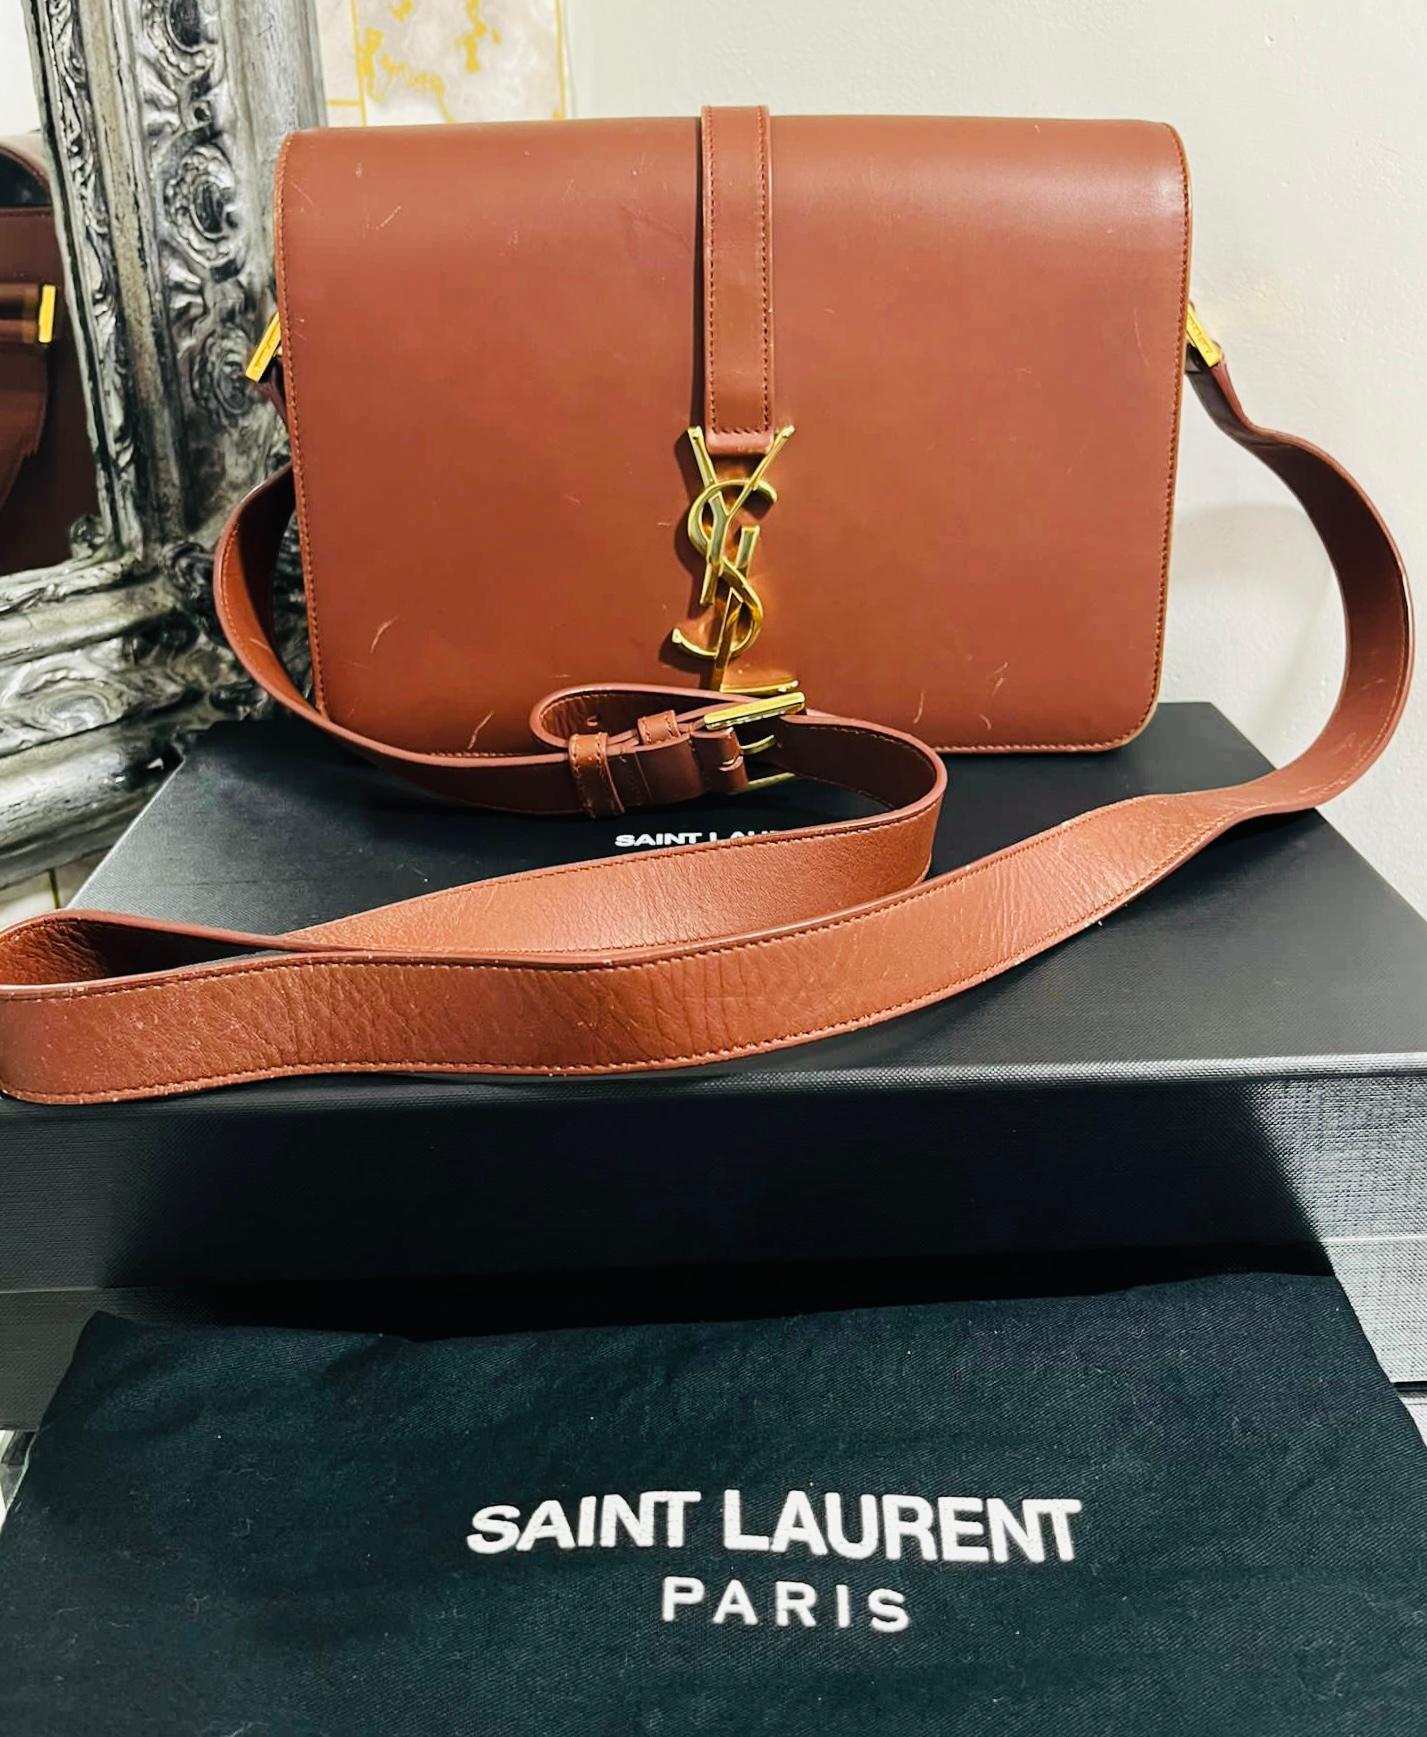 Saint Laurent Leather Cross-Body Bag

Brown 'Universite' structured bag detailed with gold 'YSL logo to the front.

Designed with flap, magnetic closure and adjustable, detachable leather shoulder strap.

Featuring suede interior with zipped